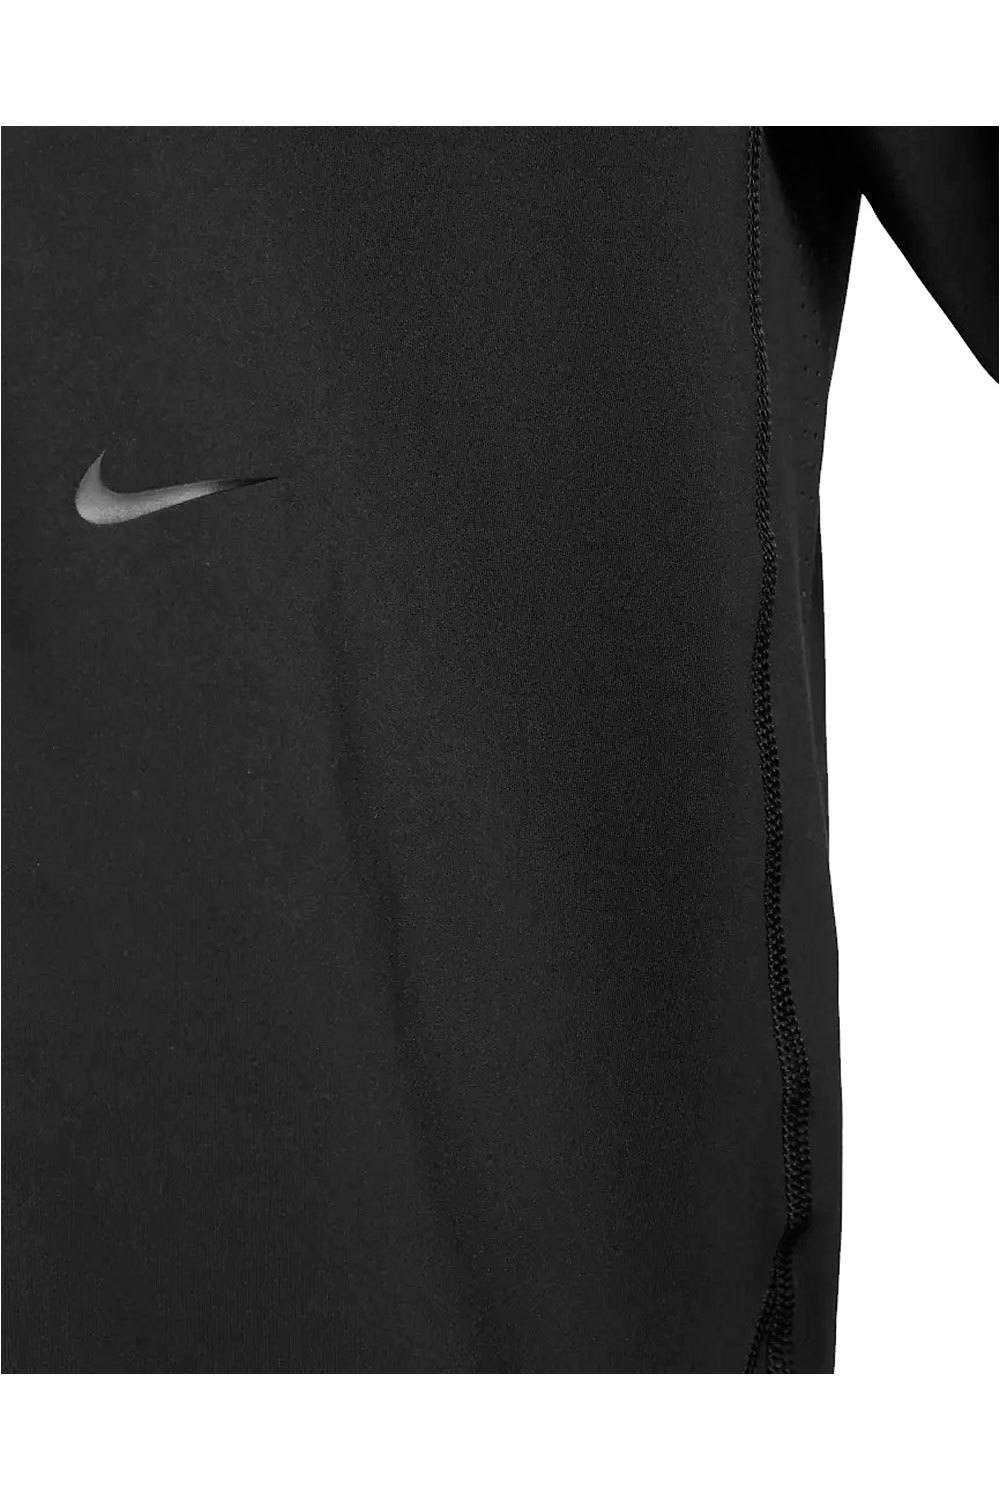 Nike camiseta fitness hombre M NK DFADV AXIS TOP SS 04